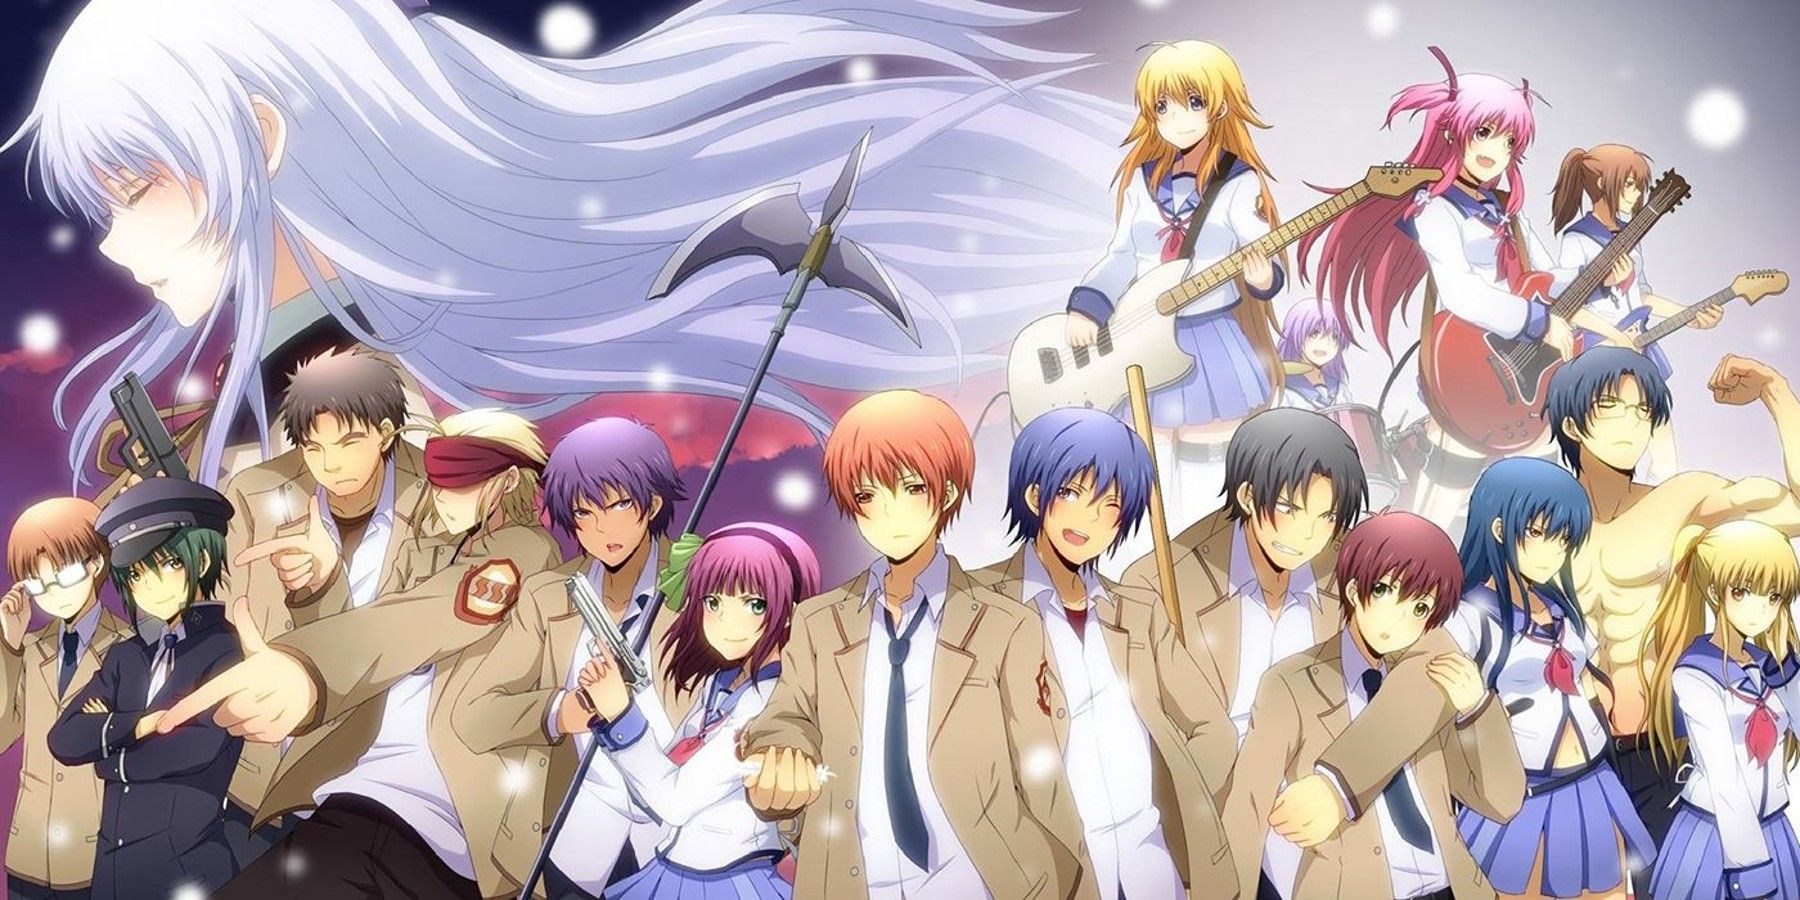 Angel Beats - All Of The Main Cast Members Gathered Together In A Group Shot That Shows Off Their Most Identifiable Personaltiy Traits (1)